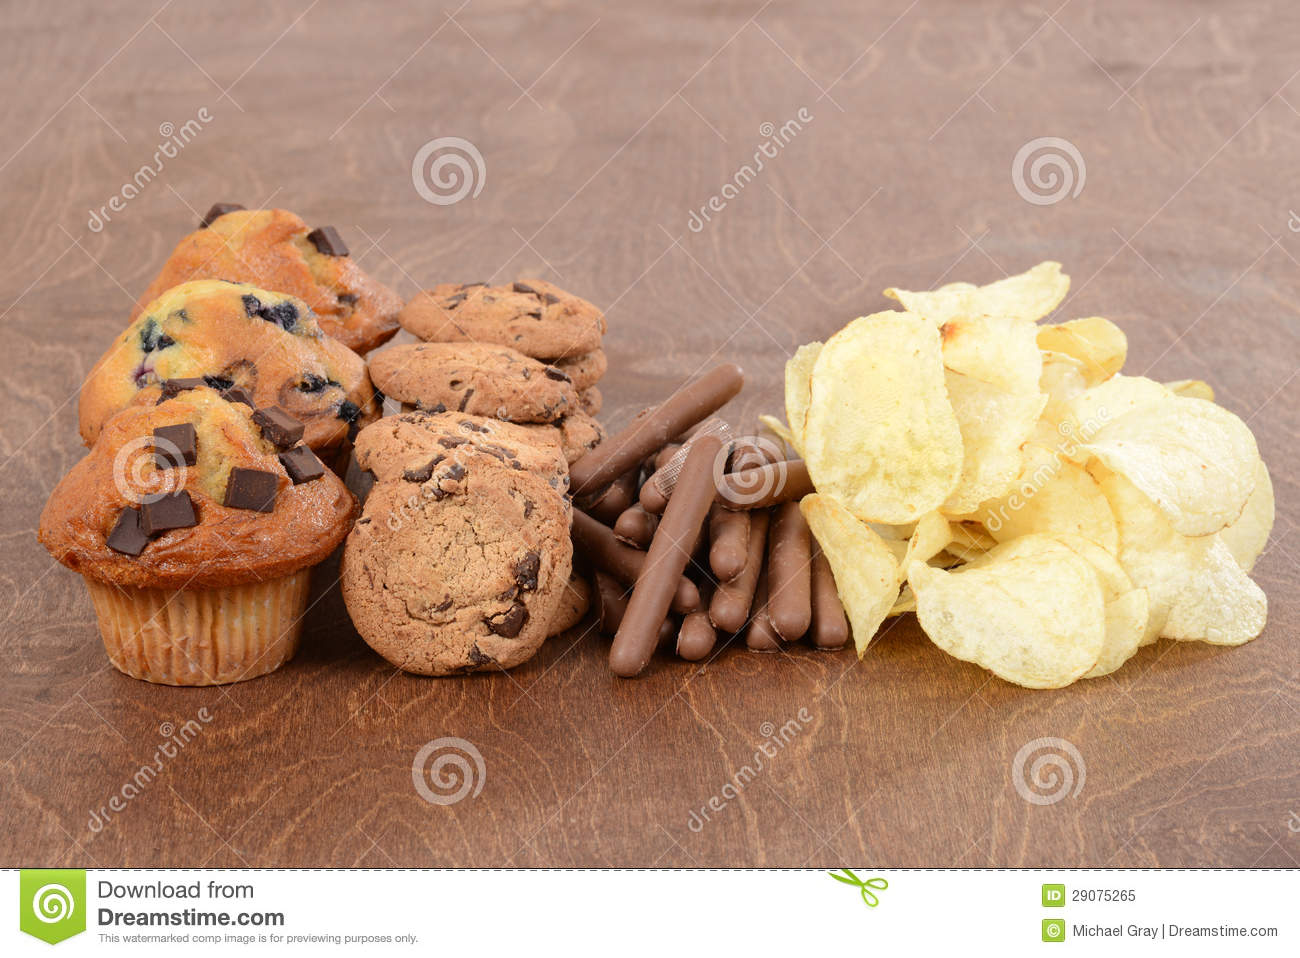 Pile Of Junk Food Royalty Free Stock Photo   Image  29075265